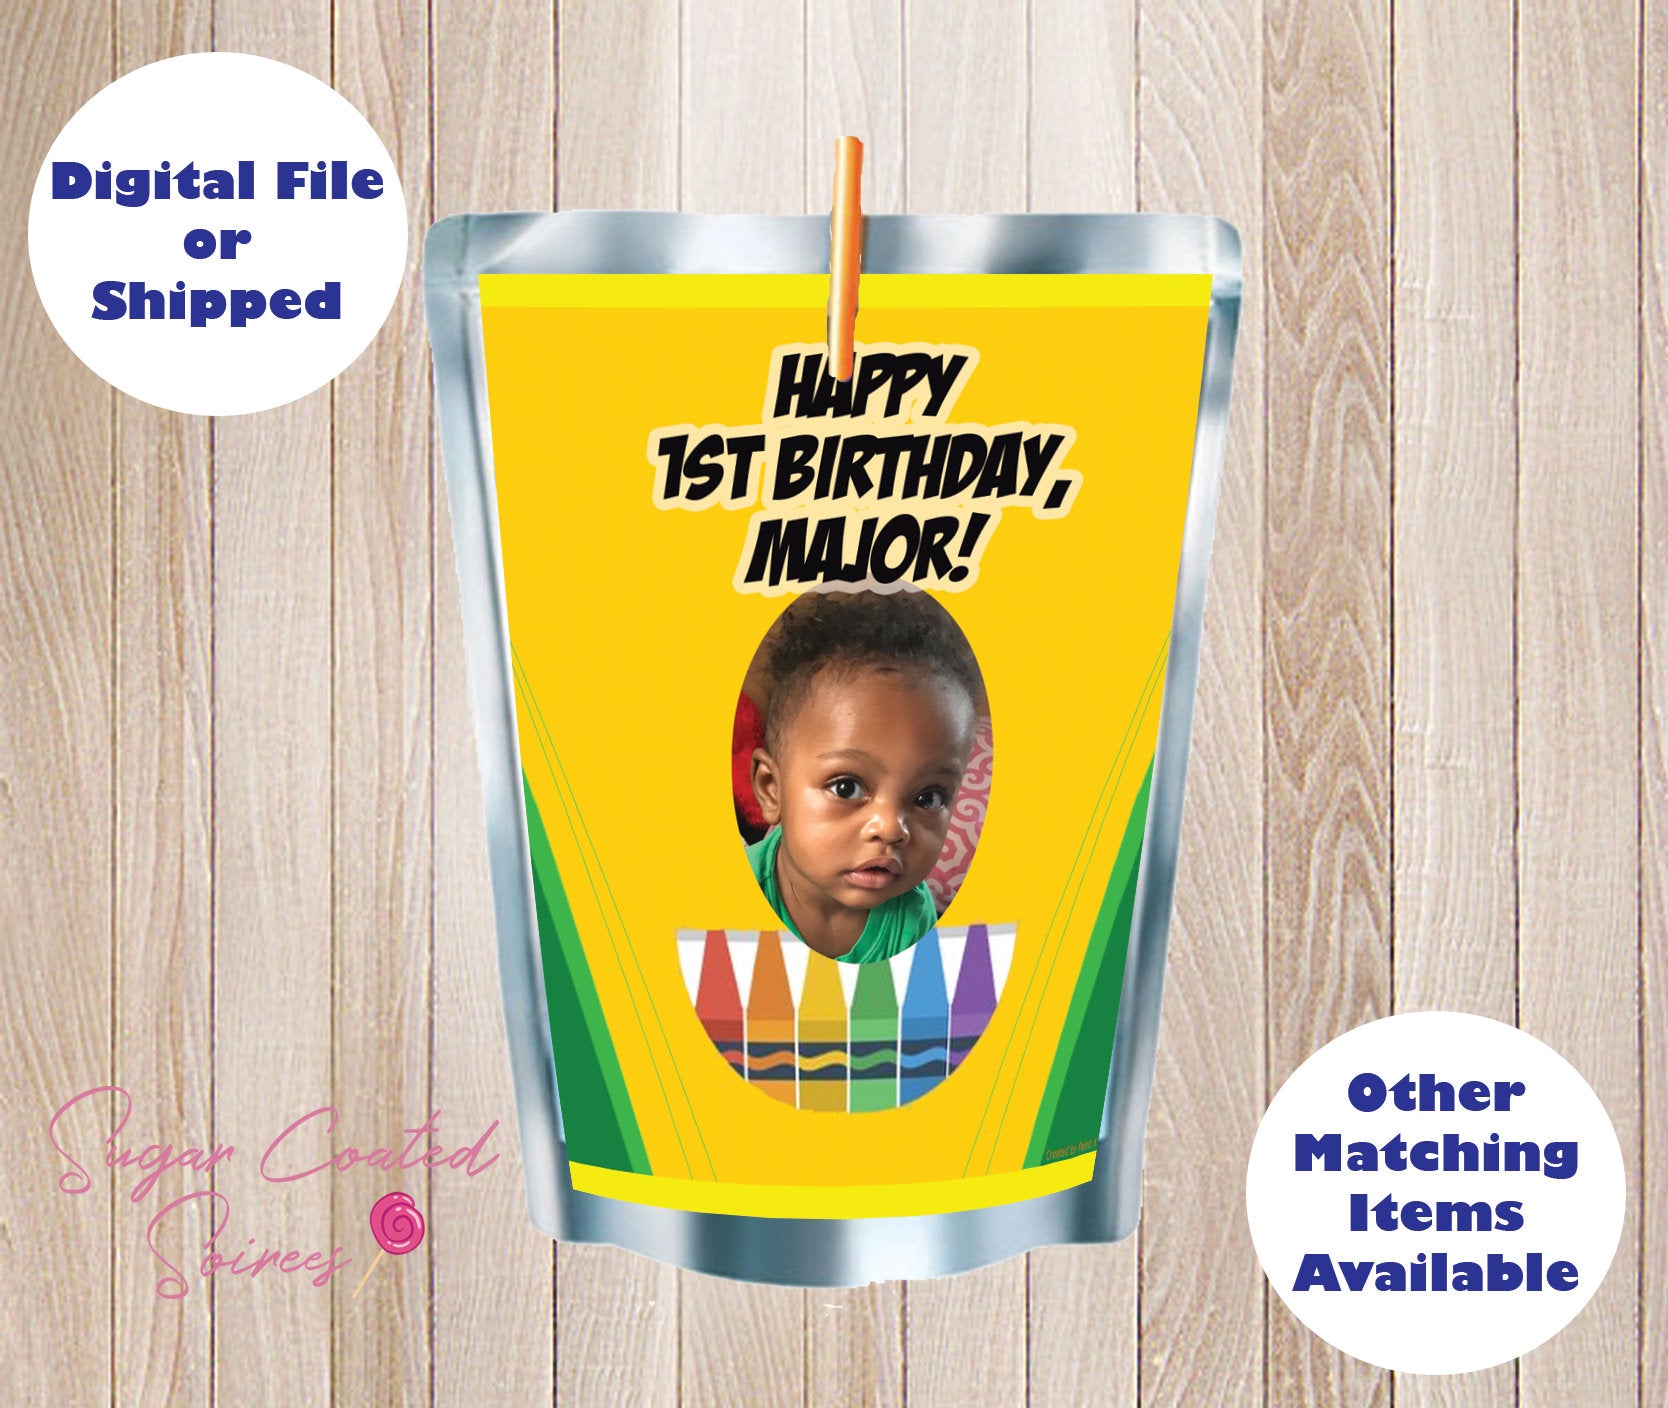 PRINTED and SHIPPED  Crayon Box Art Party first birthday, Personalized Capri Sun Juice Pouch Label, Birthday Party, Favor, DIY